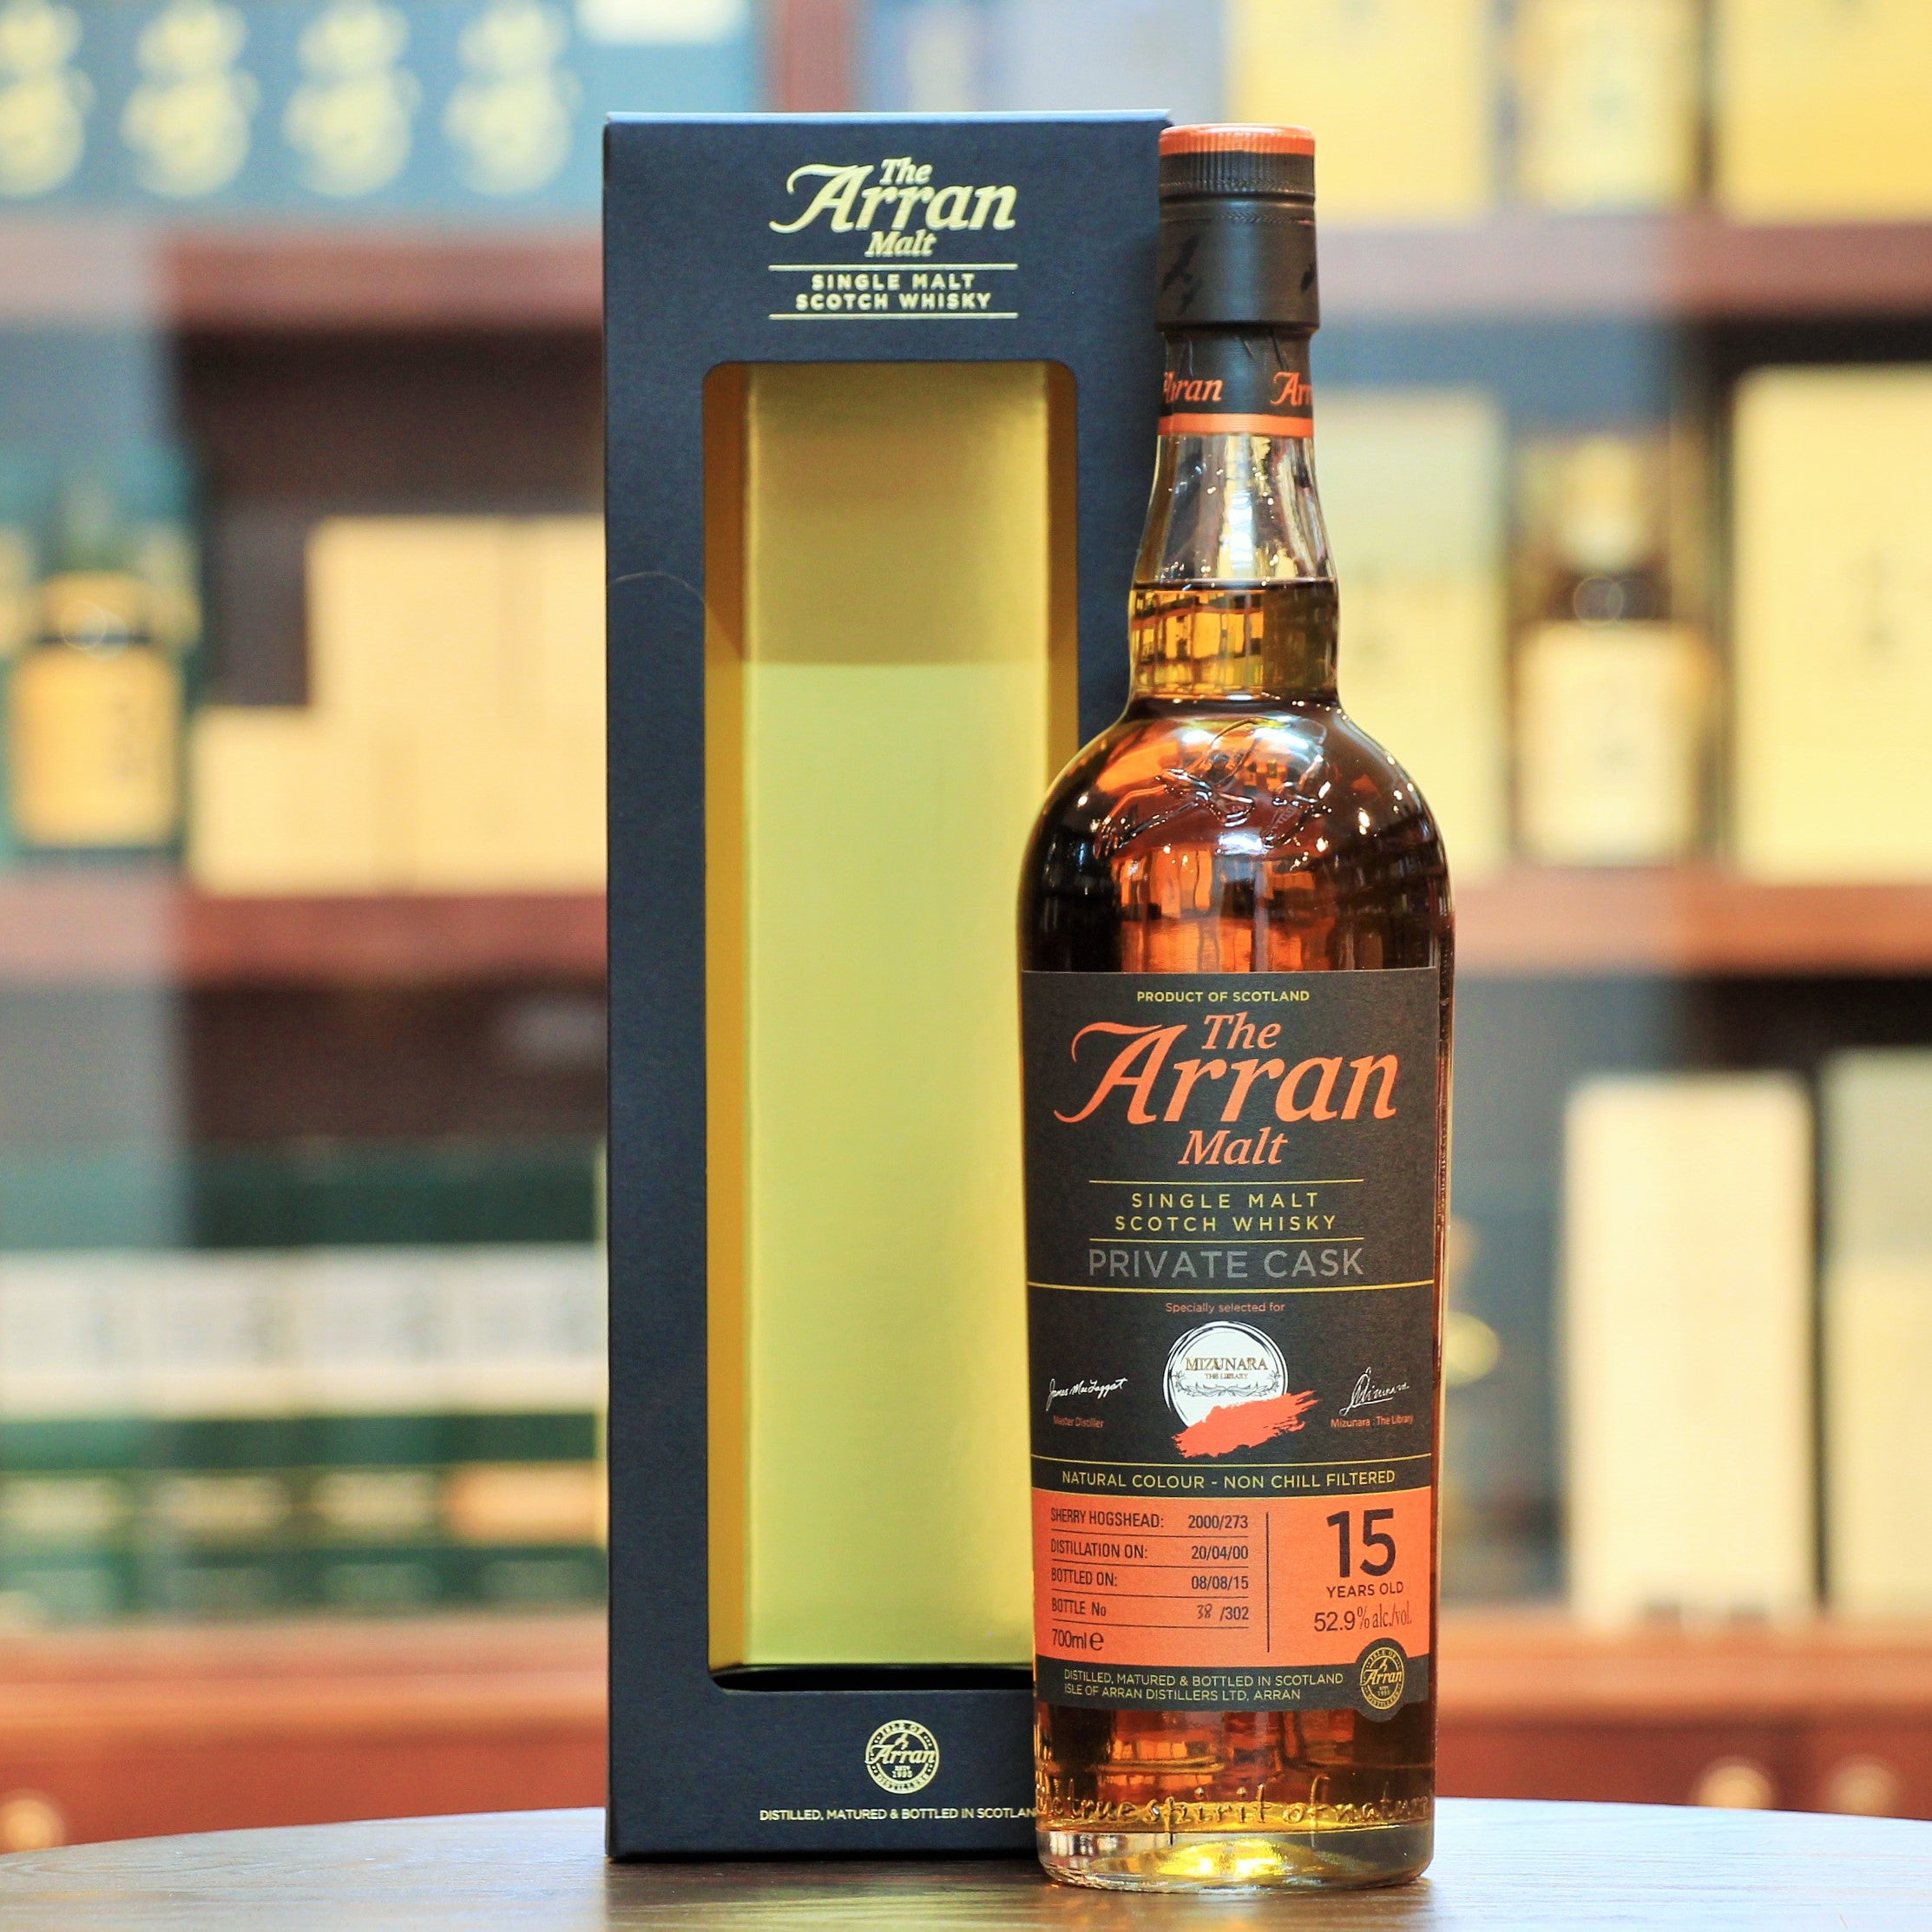 Arran 15 Years Single Malt Whisky, Sherry Hogshead Private Cask Bottling for Mizunara Hong Kong. Rated 87 points by WhiskyFun (SGP:641). Review Link here. Limited to 302 bottles.  Distilled 20.04.2000  Bottled 08.08.2015